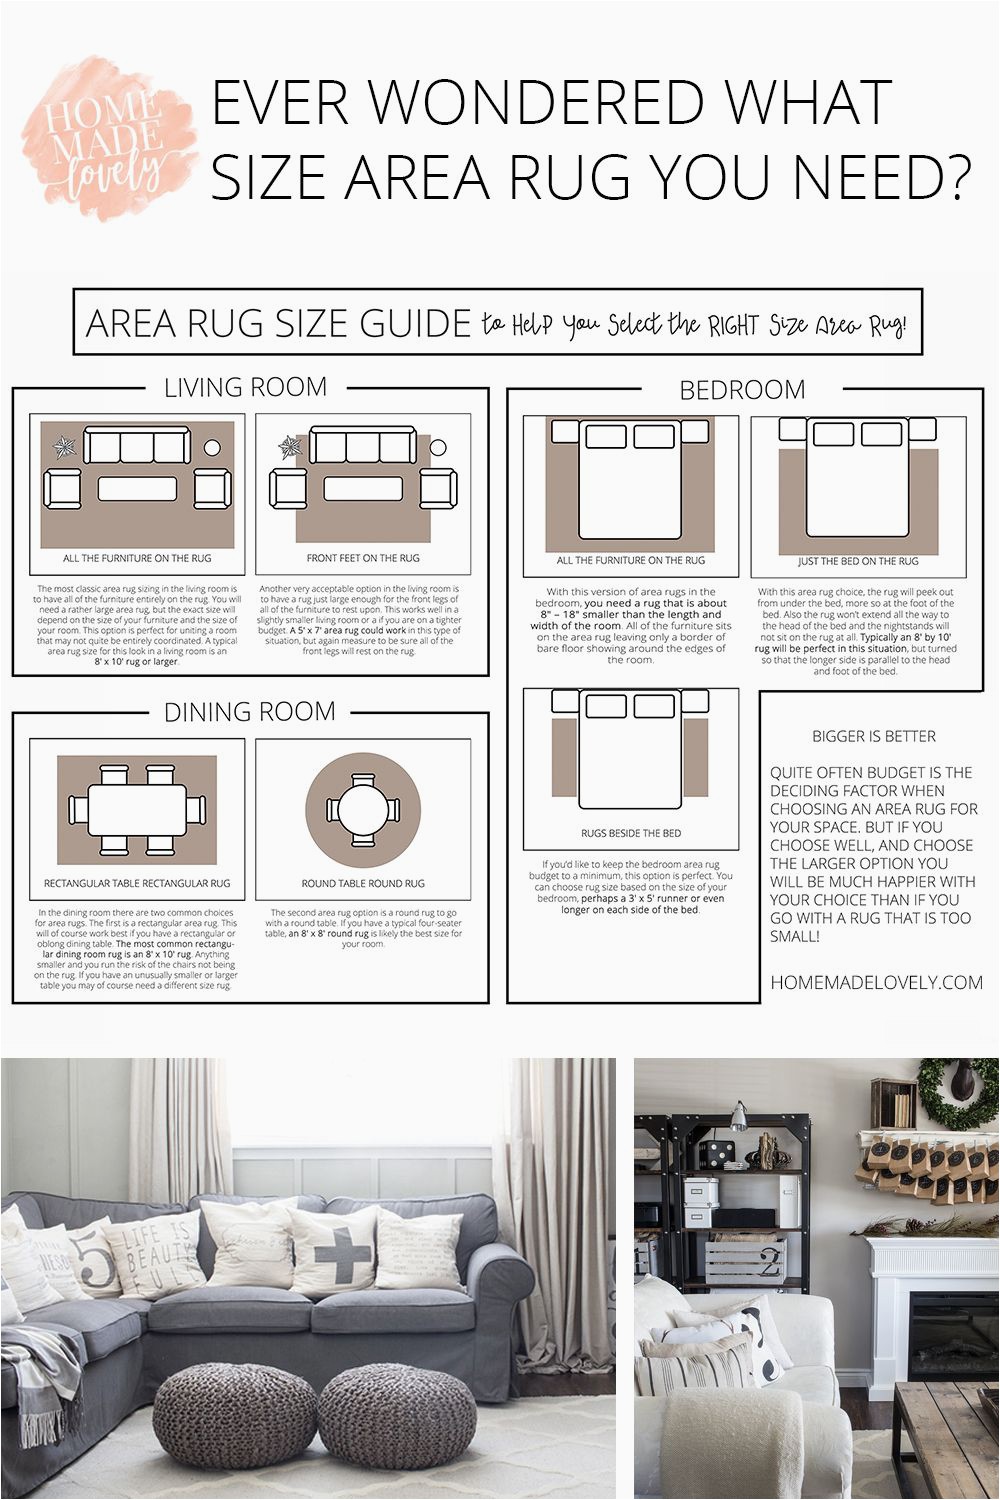 Area Rug Size for Dining Room Table area Rug Size Guide to Help You Select the Right Size area